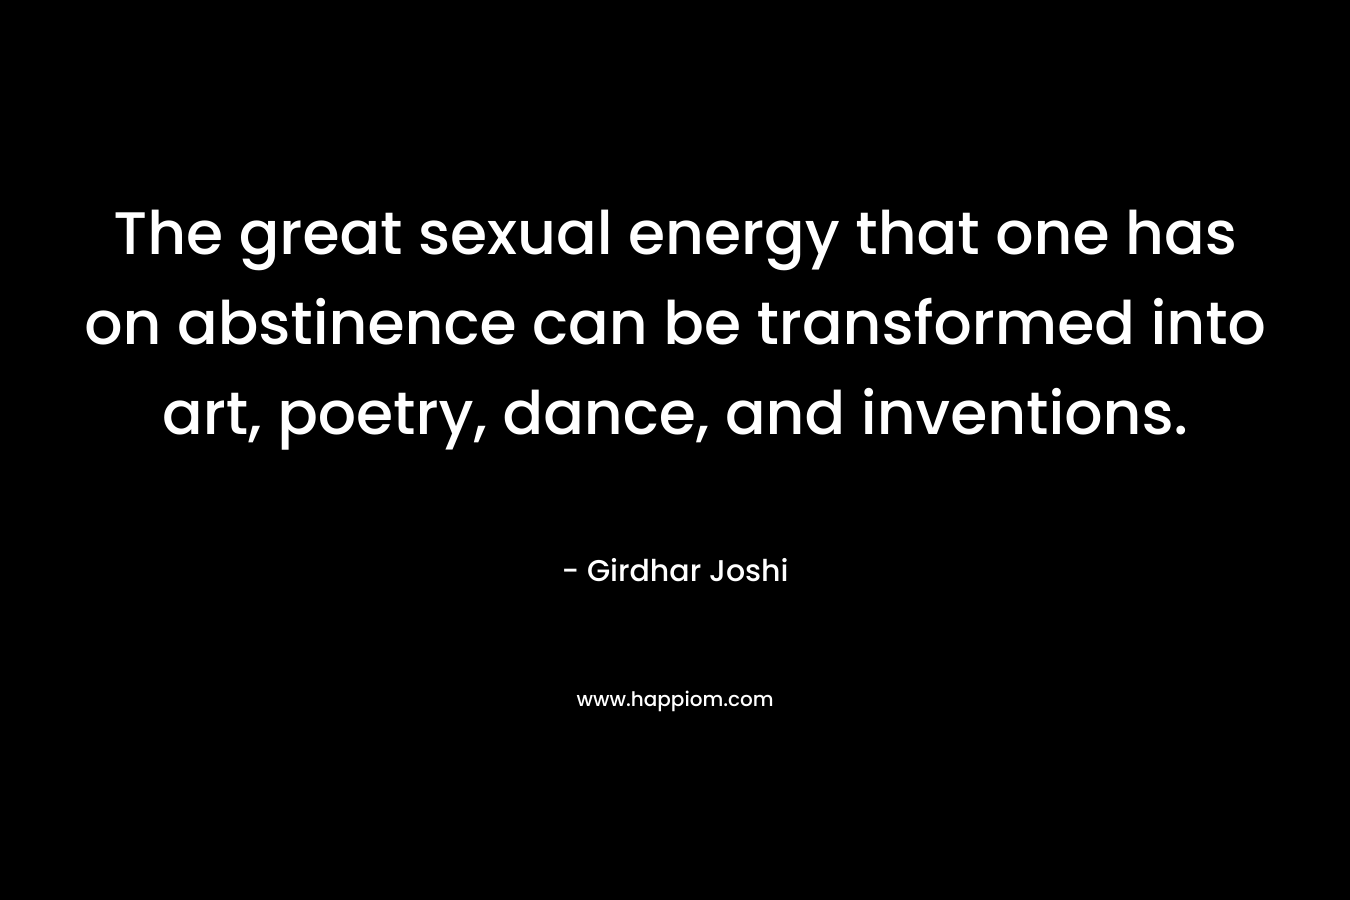 The great sexual energy that one has on abstinence can be transformed into art, poetry, dance, and inventions. – Girdhar Joshi